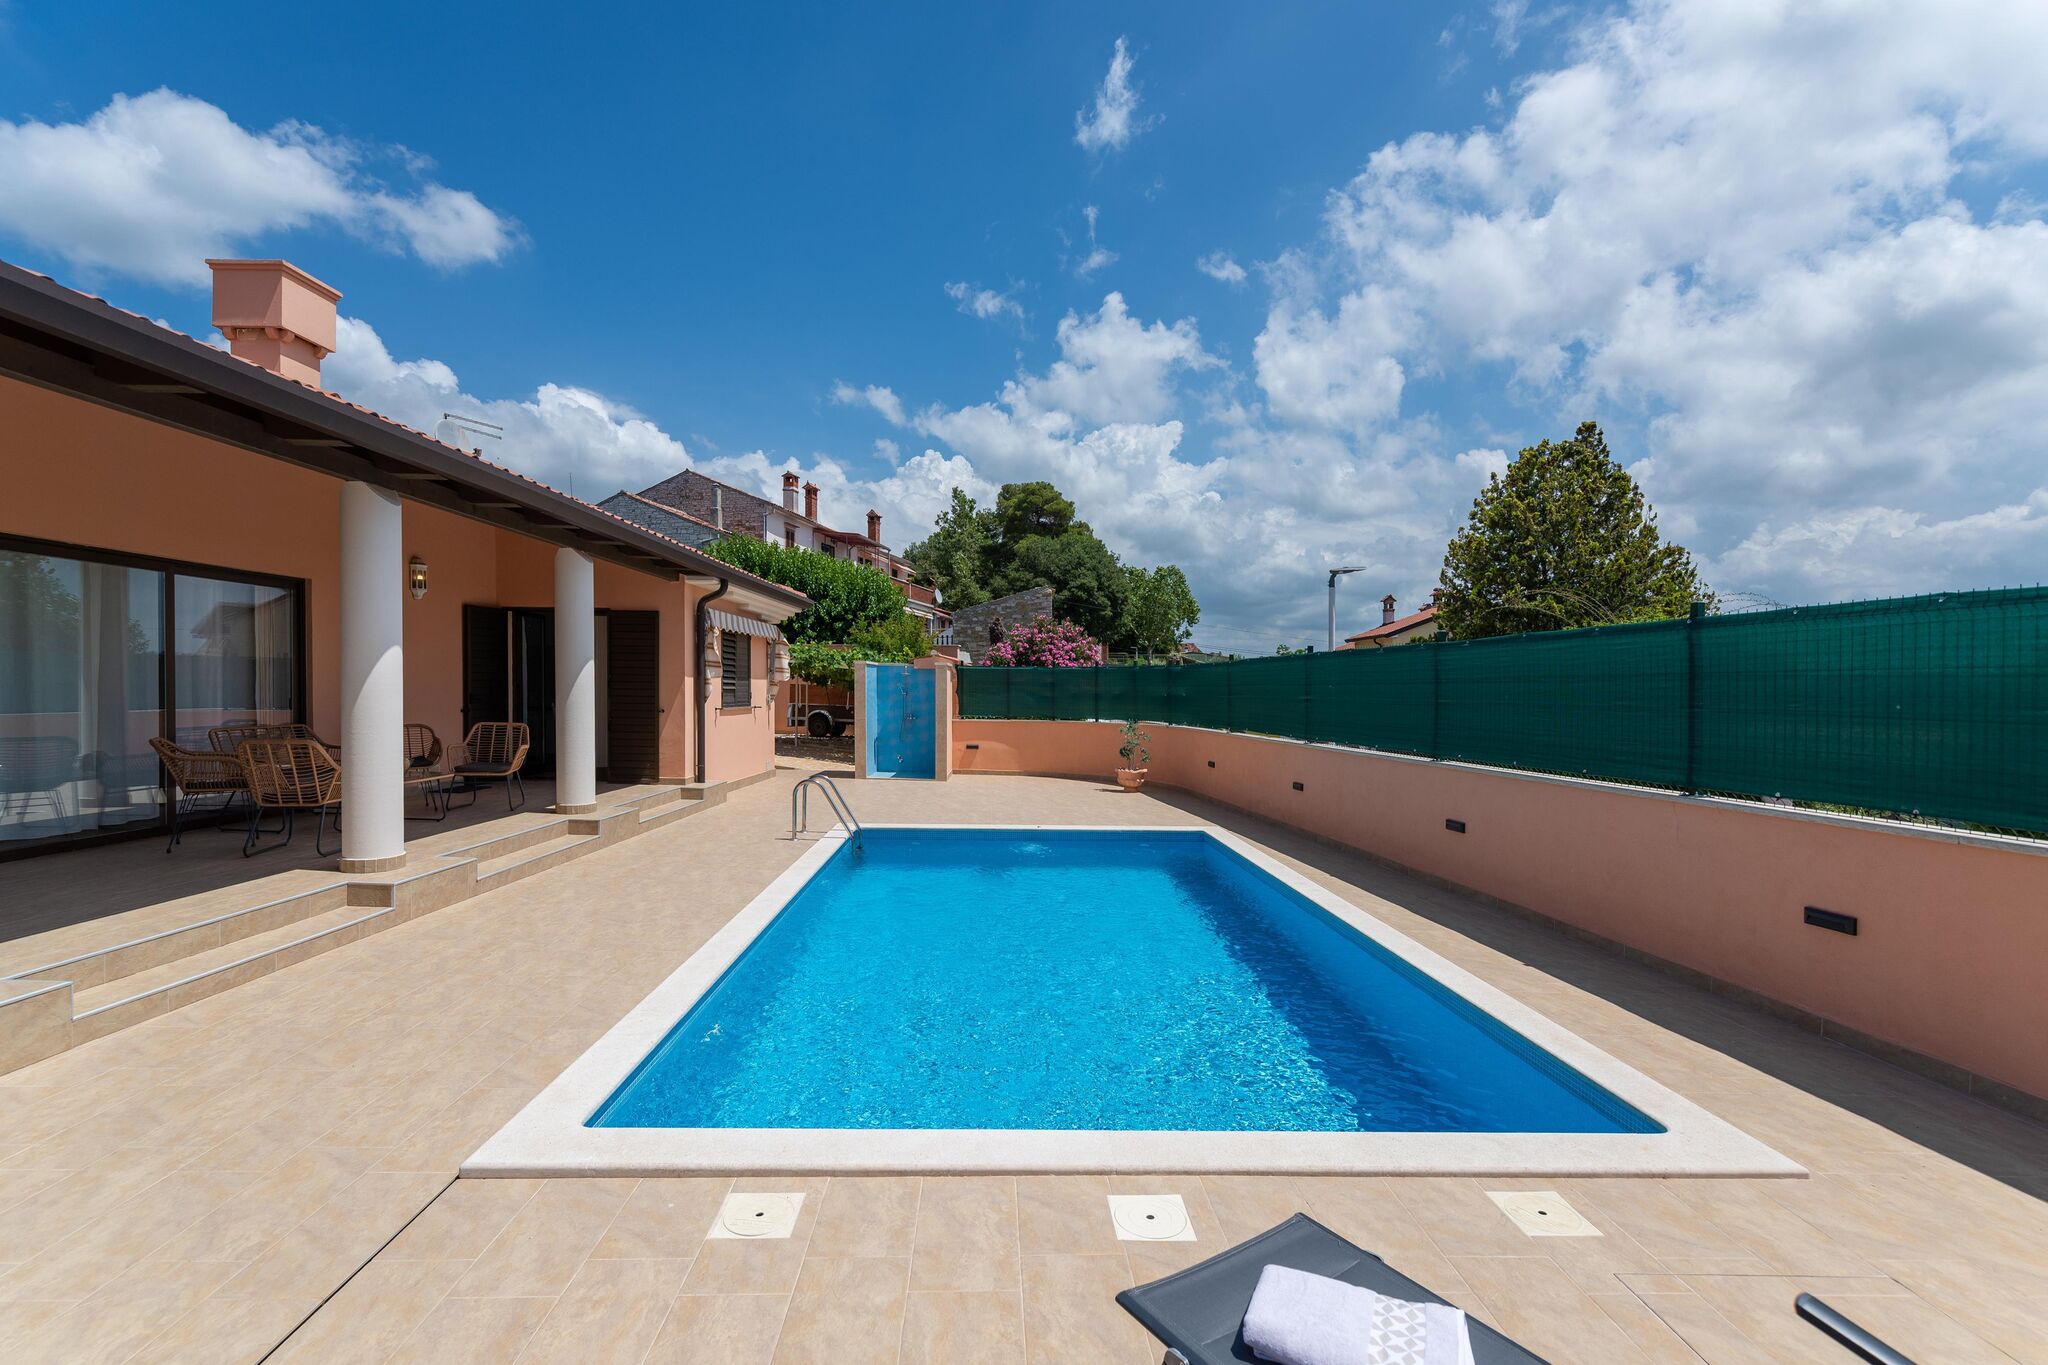 Lovely holiday home with pool, covered terrace and outdoor kitchen